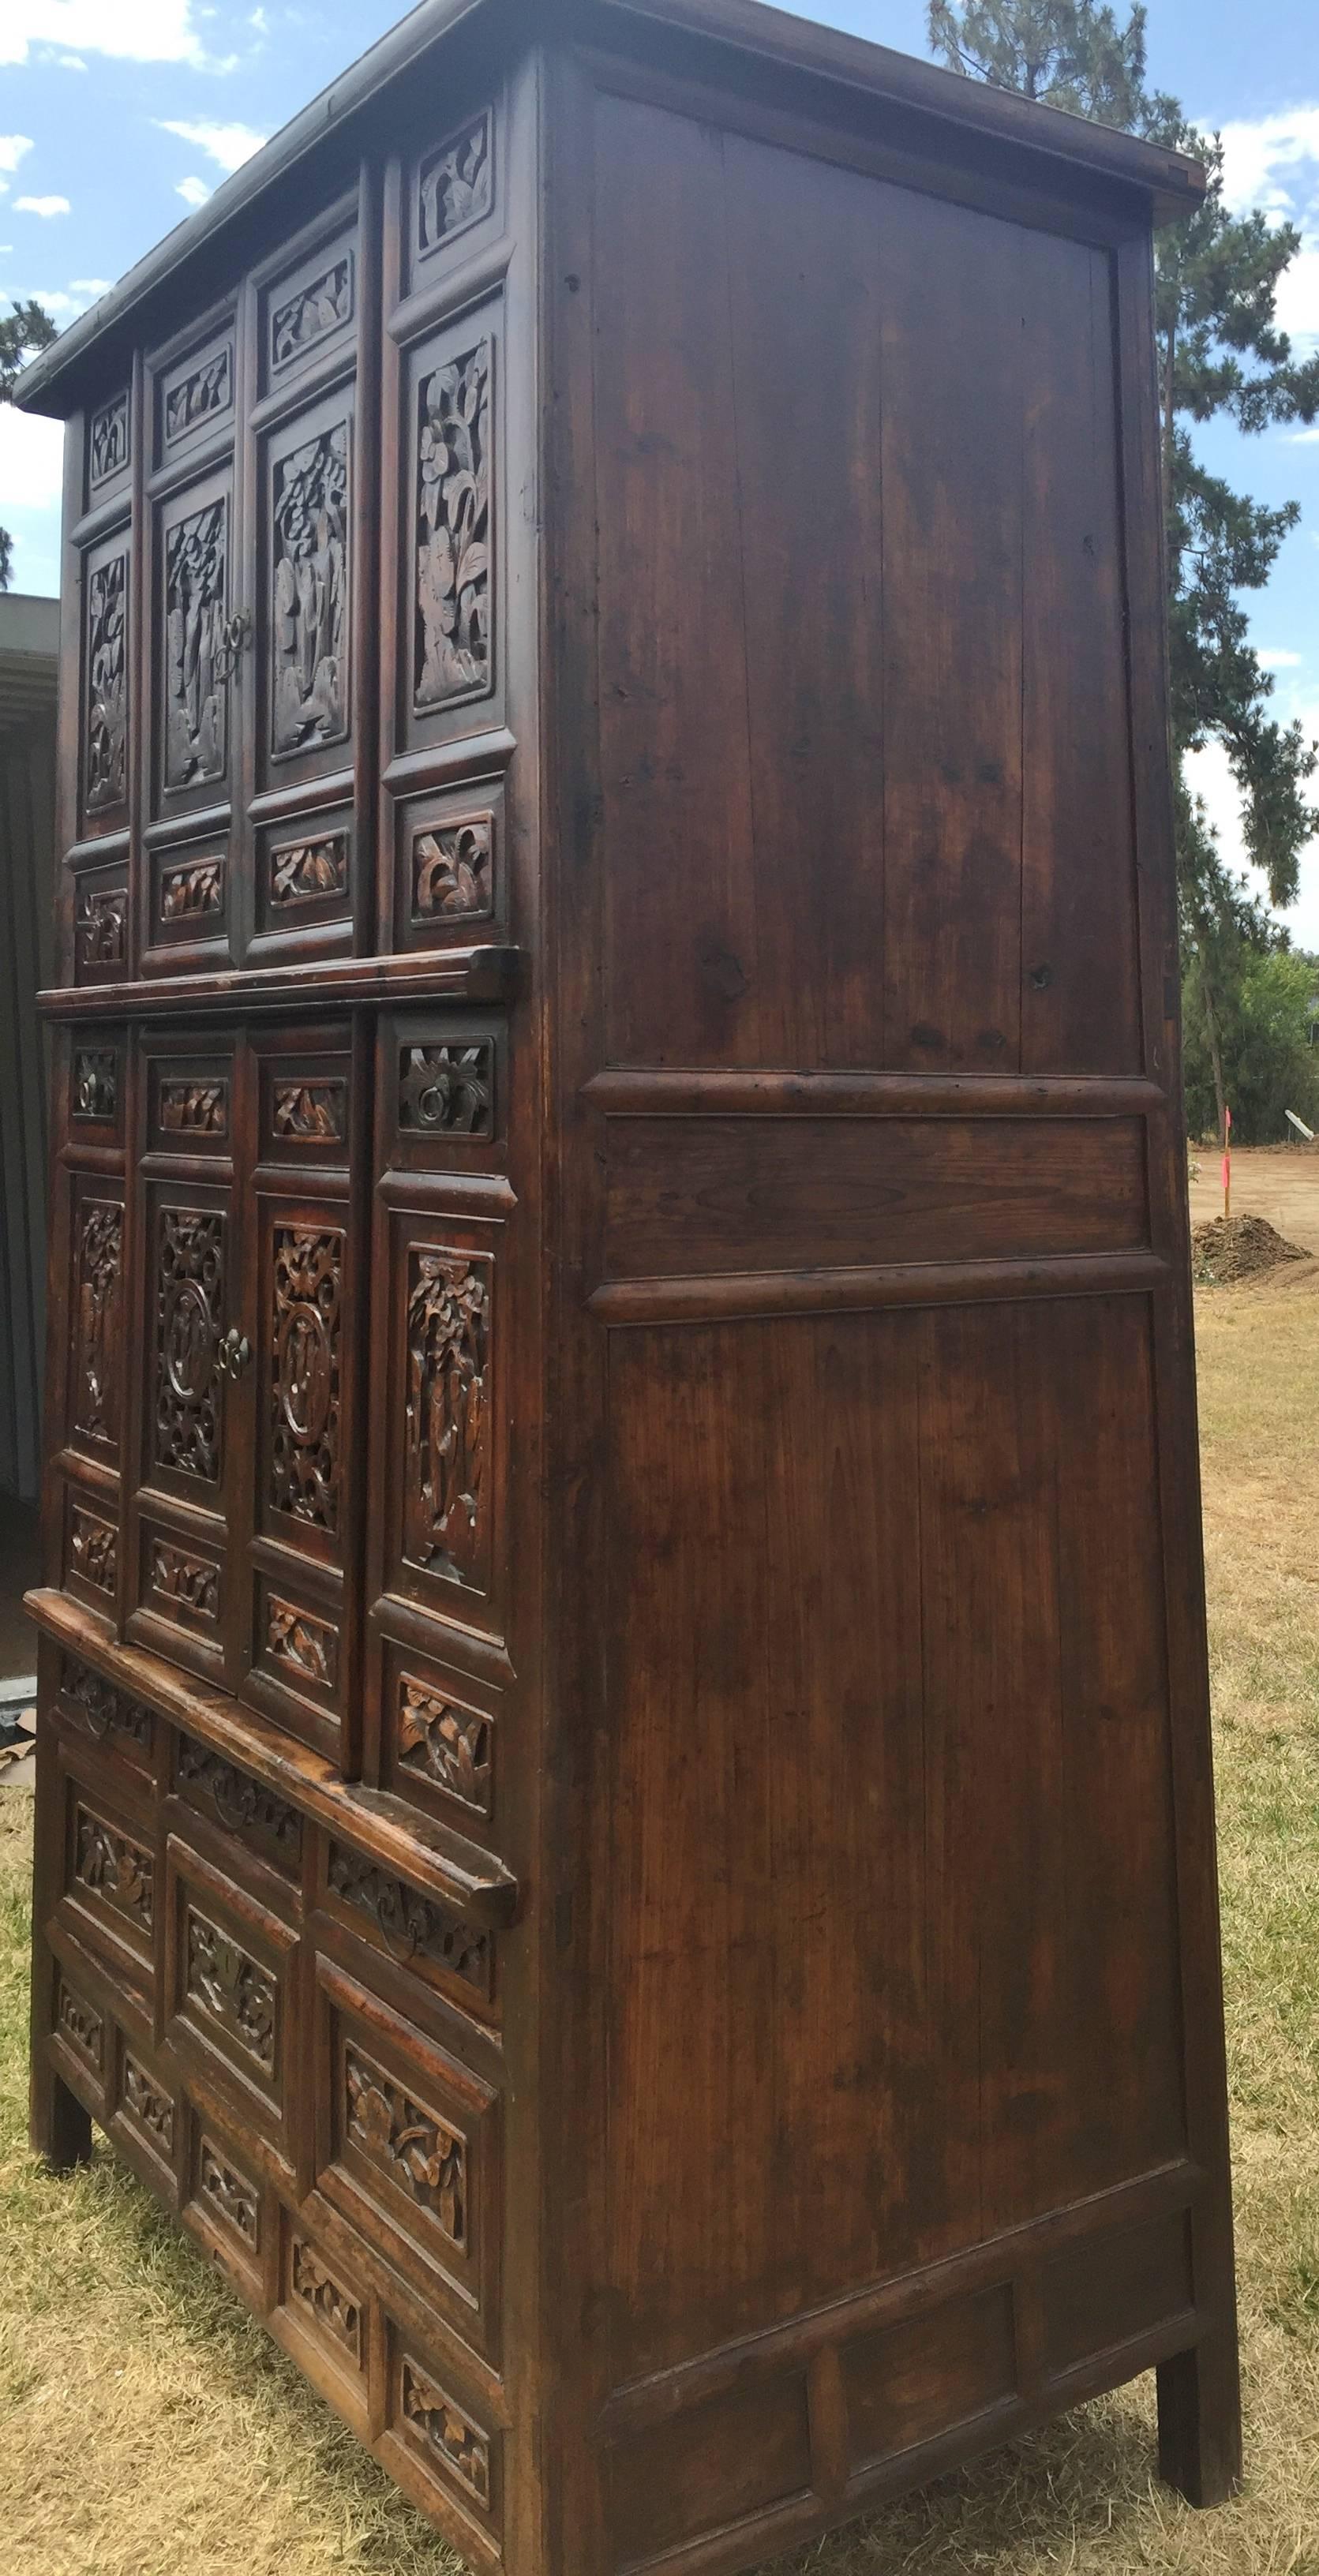 A monumental, fully carved Chinese antique cabinet. At nearly 8 feet tall, this supersized cabinet stands like a giant. Carvings of floral, foliage and a couple in the garden balance out the massiveness of the cabinet, giving it an artistic touch.